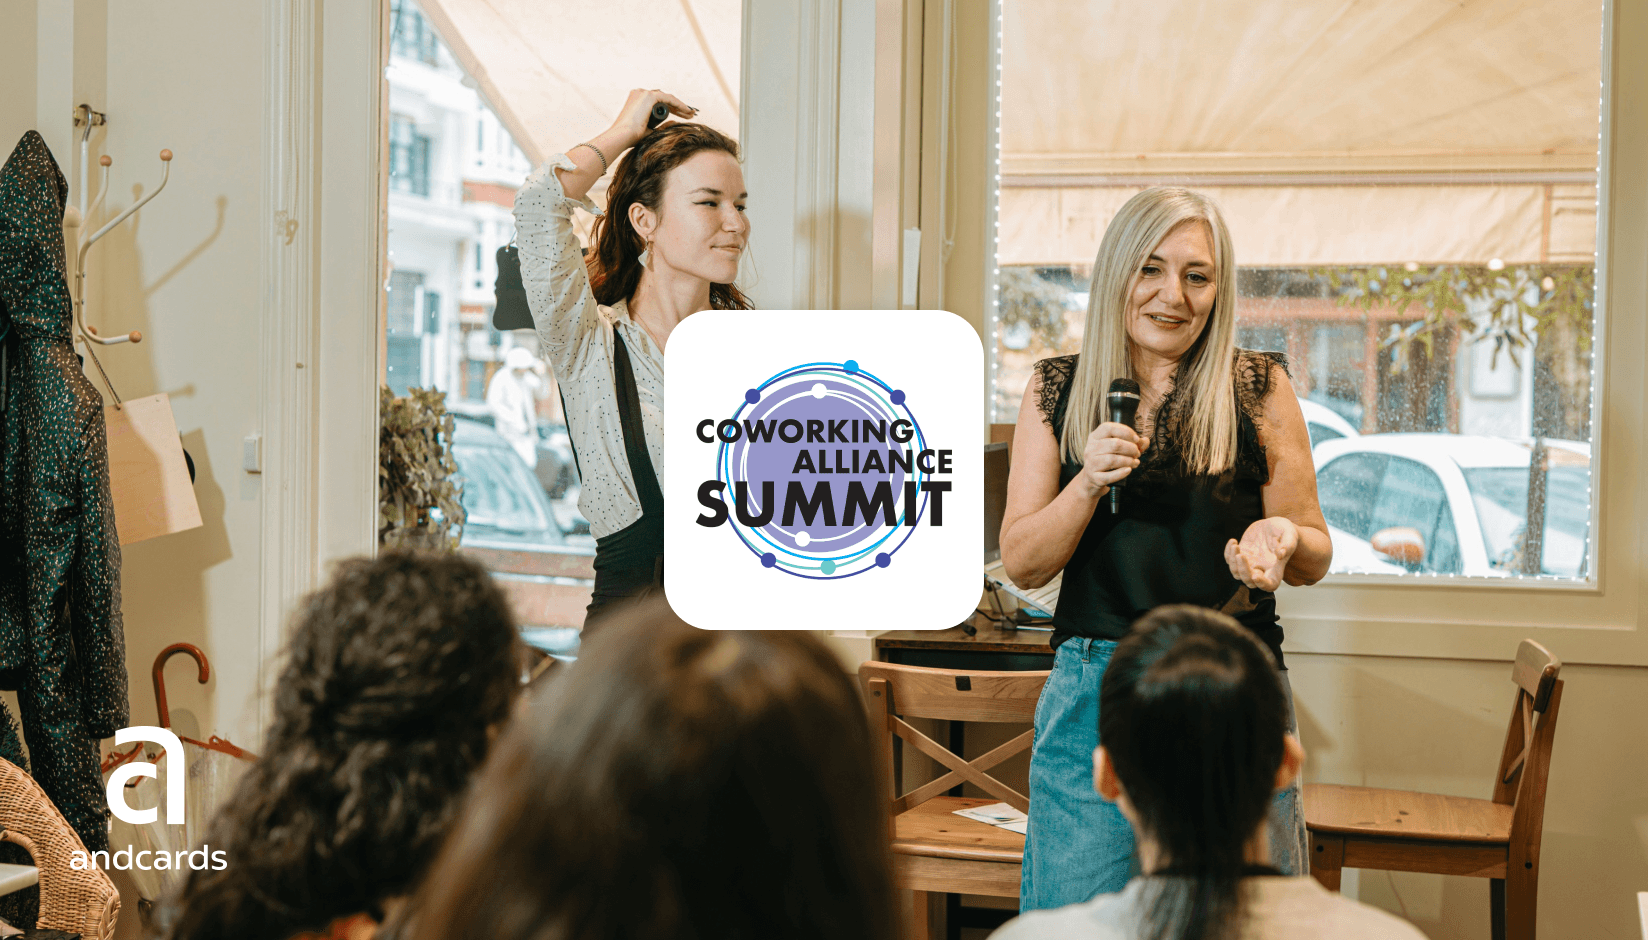 Coworking Alliance Summit: Join the Movement!